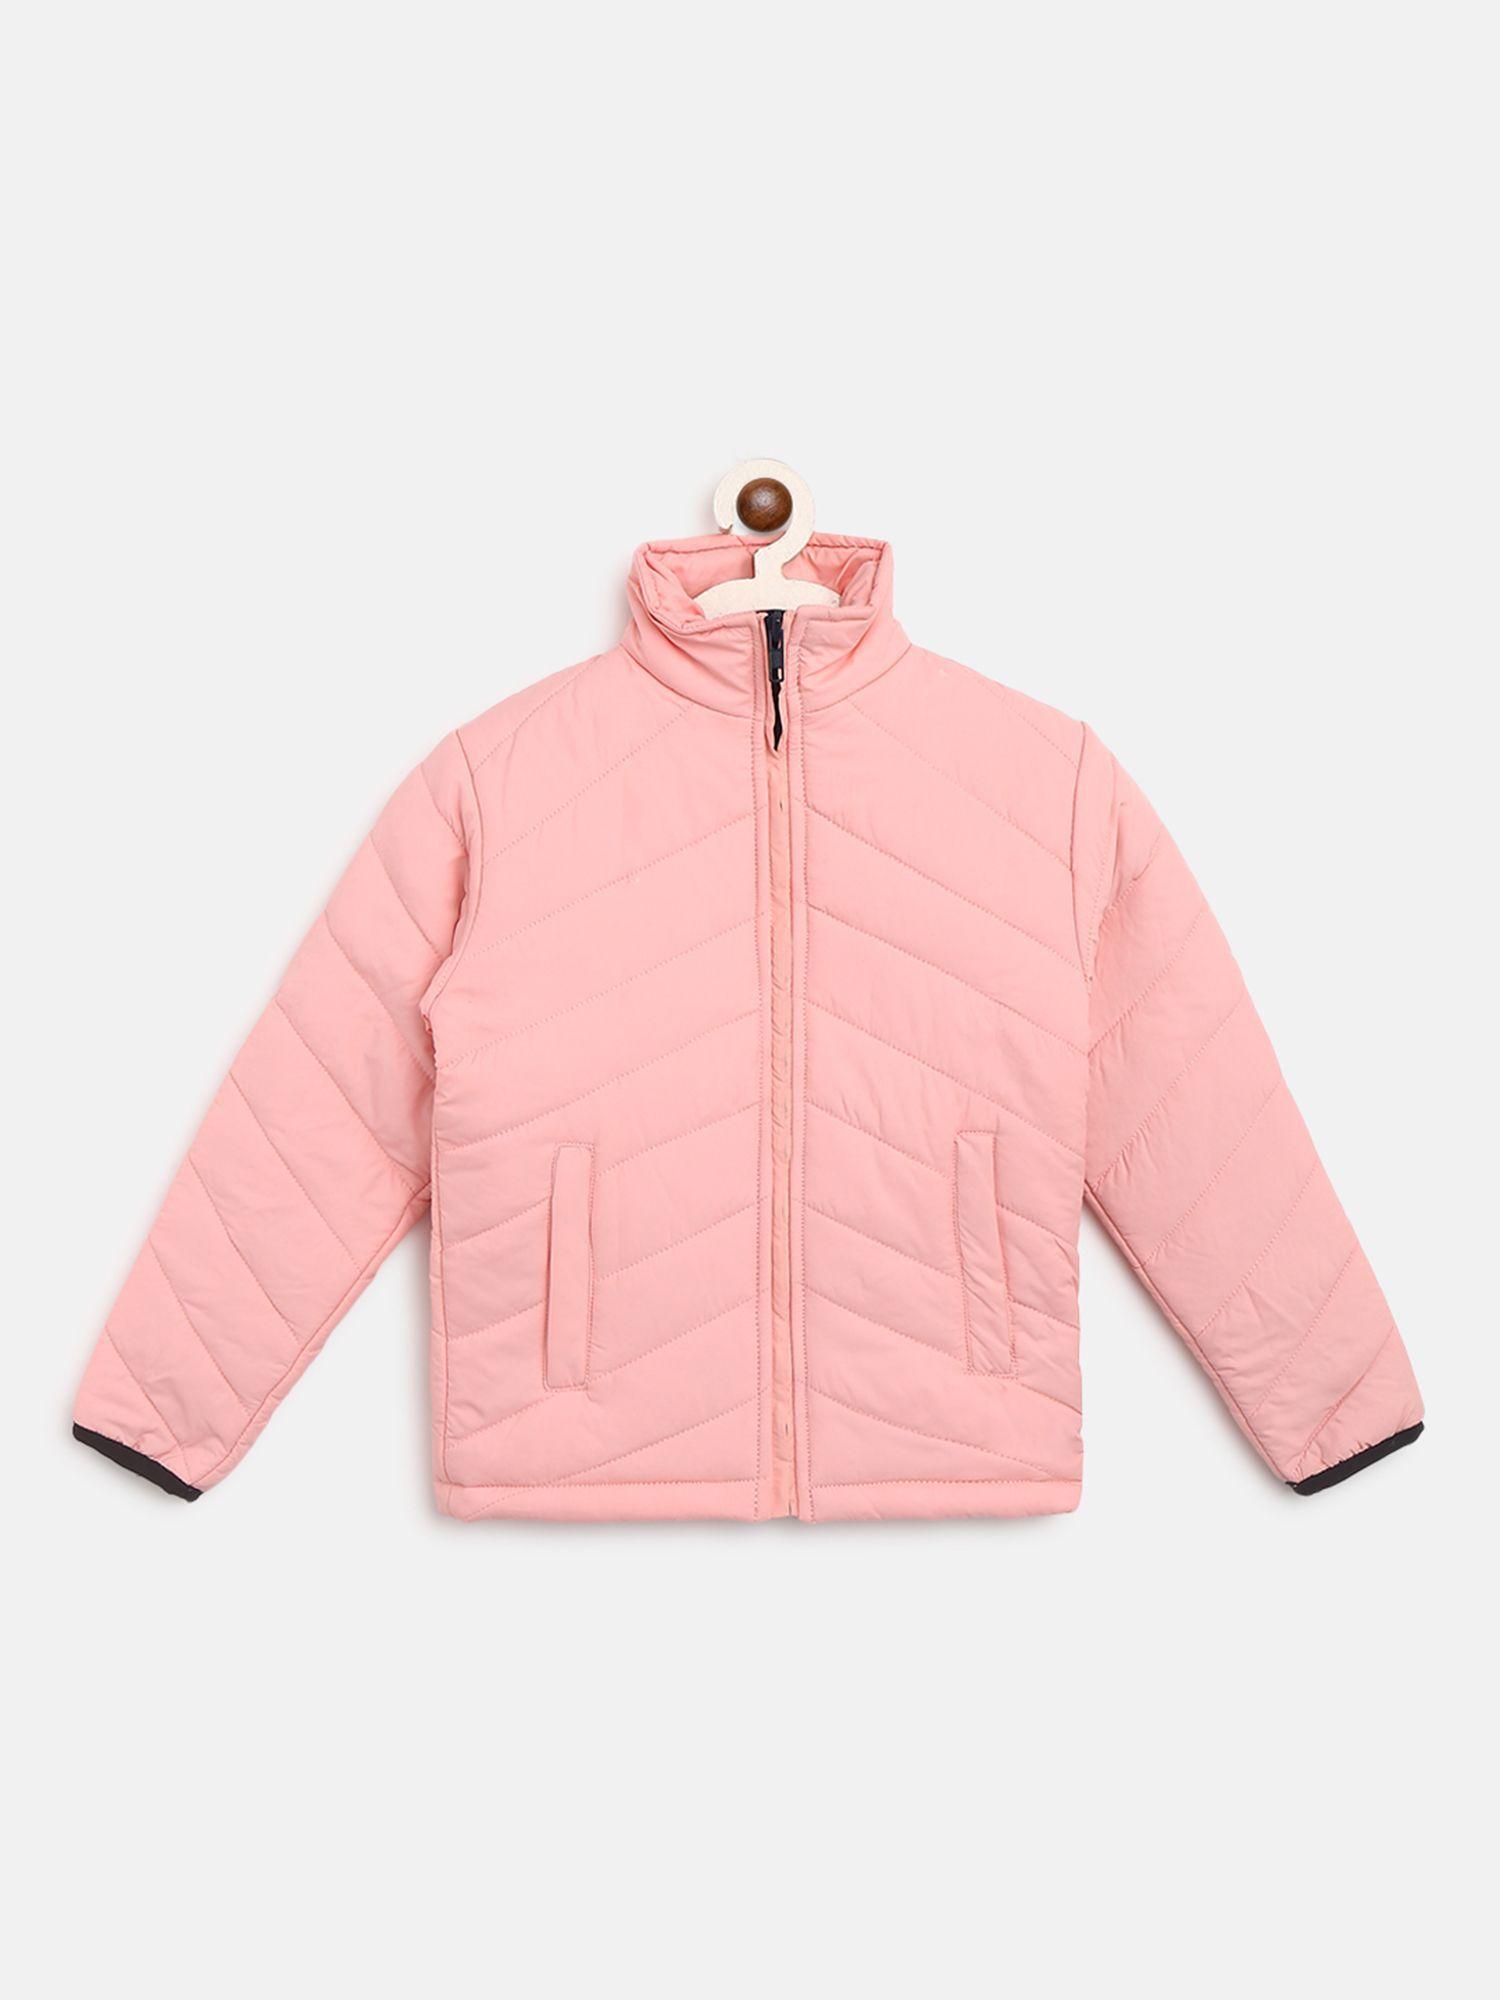 Girls Solid Stylish Casual Bomber Jackets-Peach